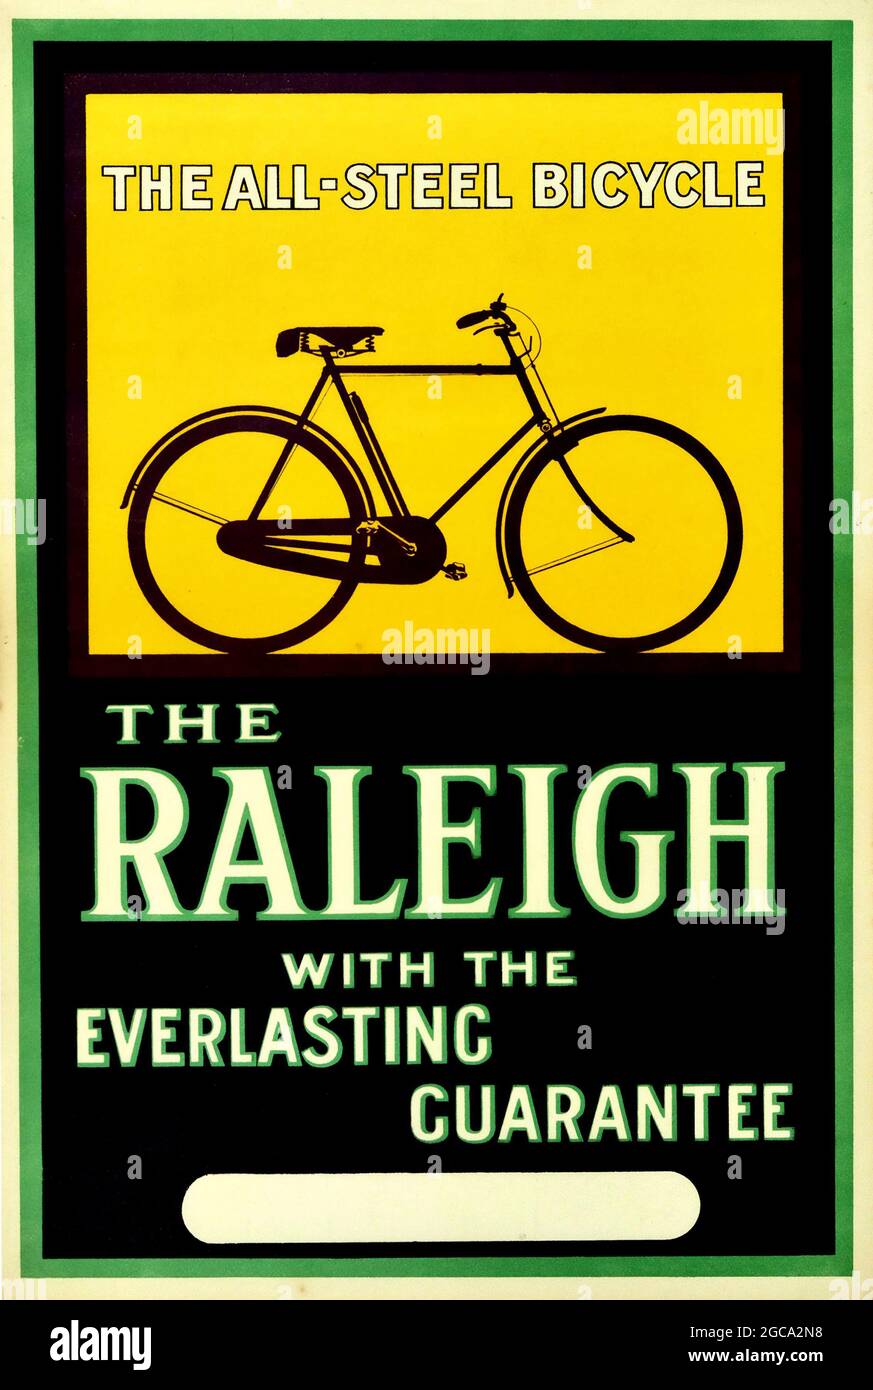 Vintage Poster - Raleigh Design Bike Advertising Art - The all-steel bicycle. Everlasting guarantee. 1930s. Stock Photo